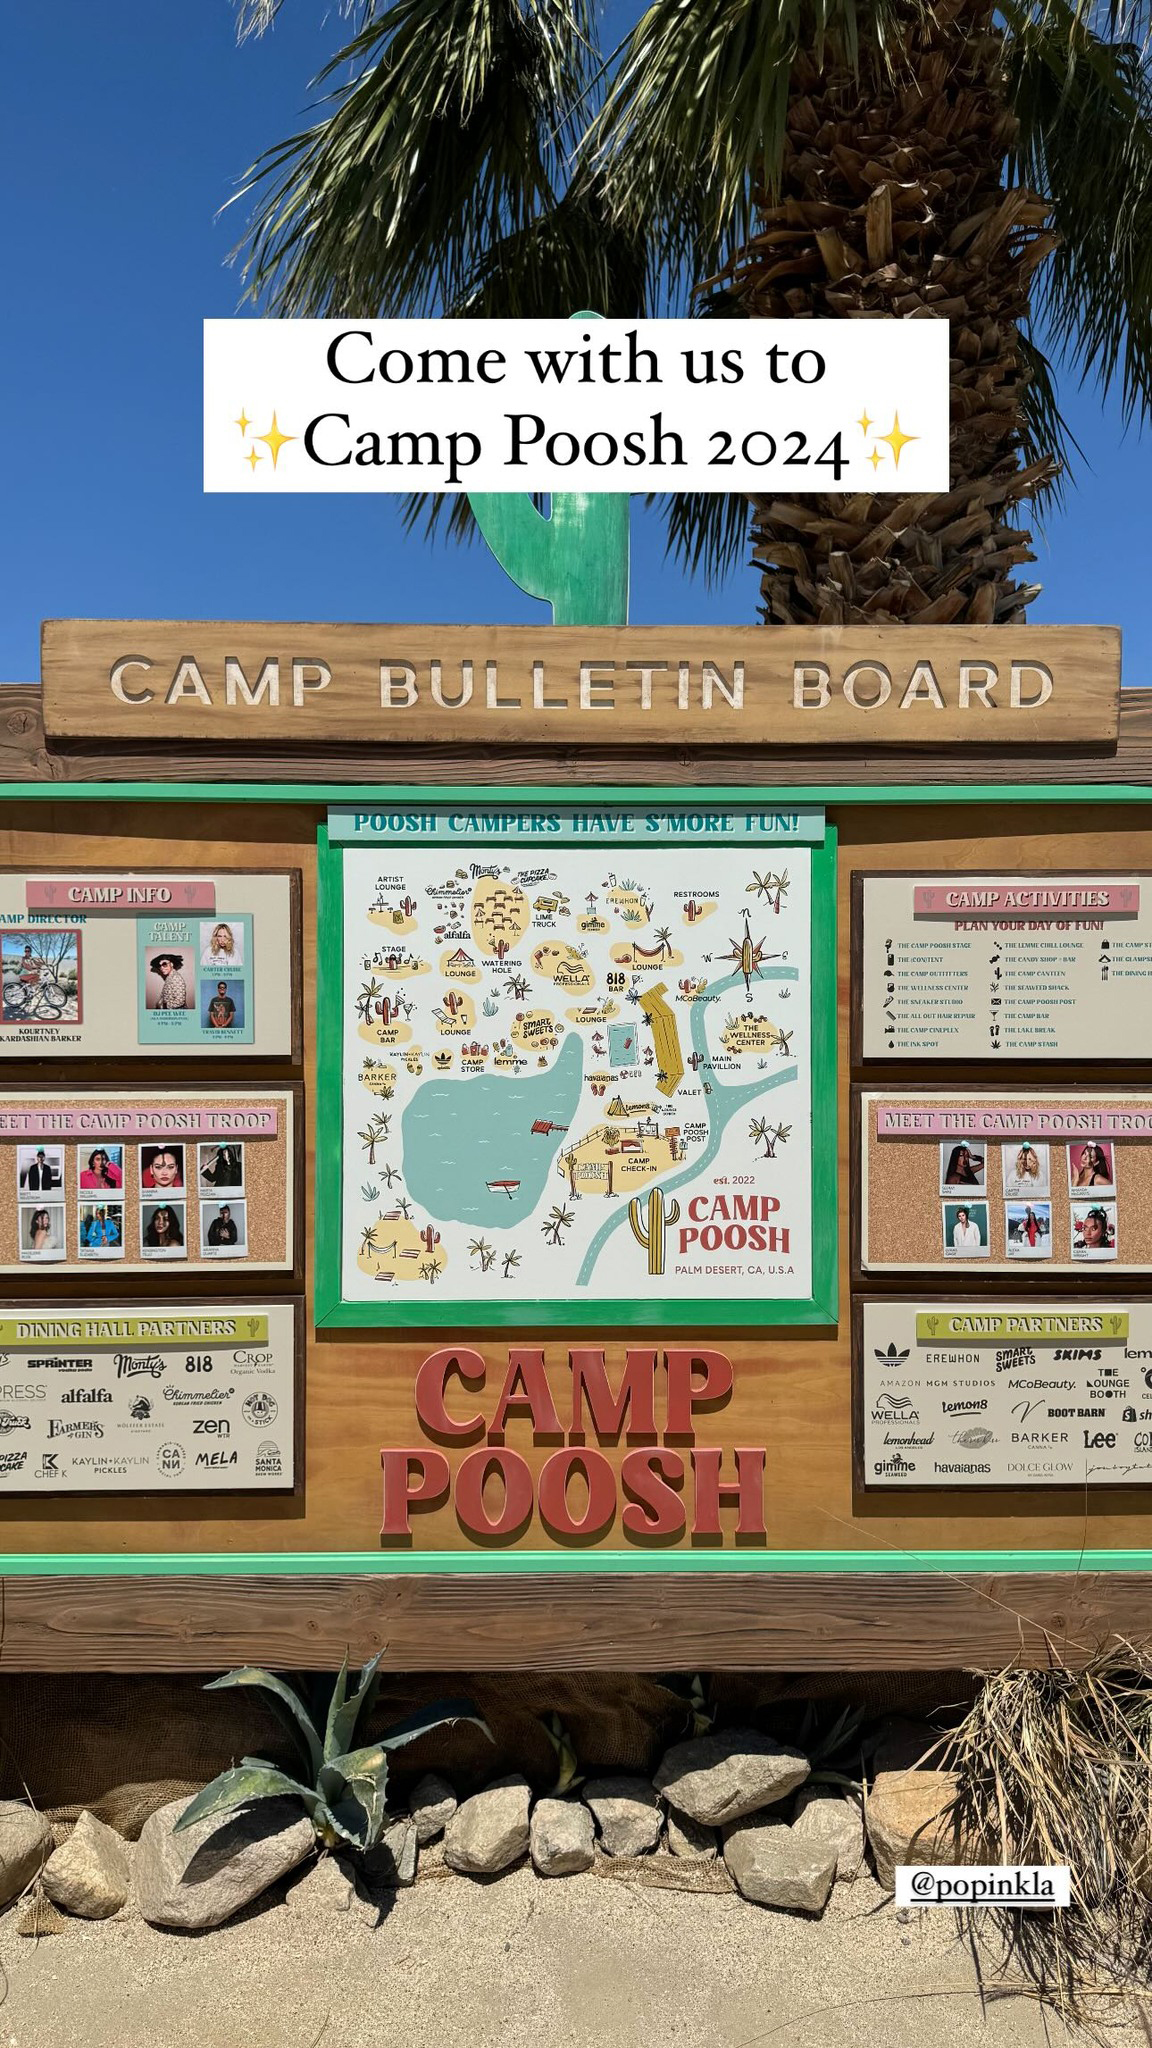 A photo of the Camp Poosh bulletin board showed off the expansive campsite map and included counselor and camper information